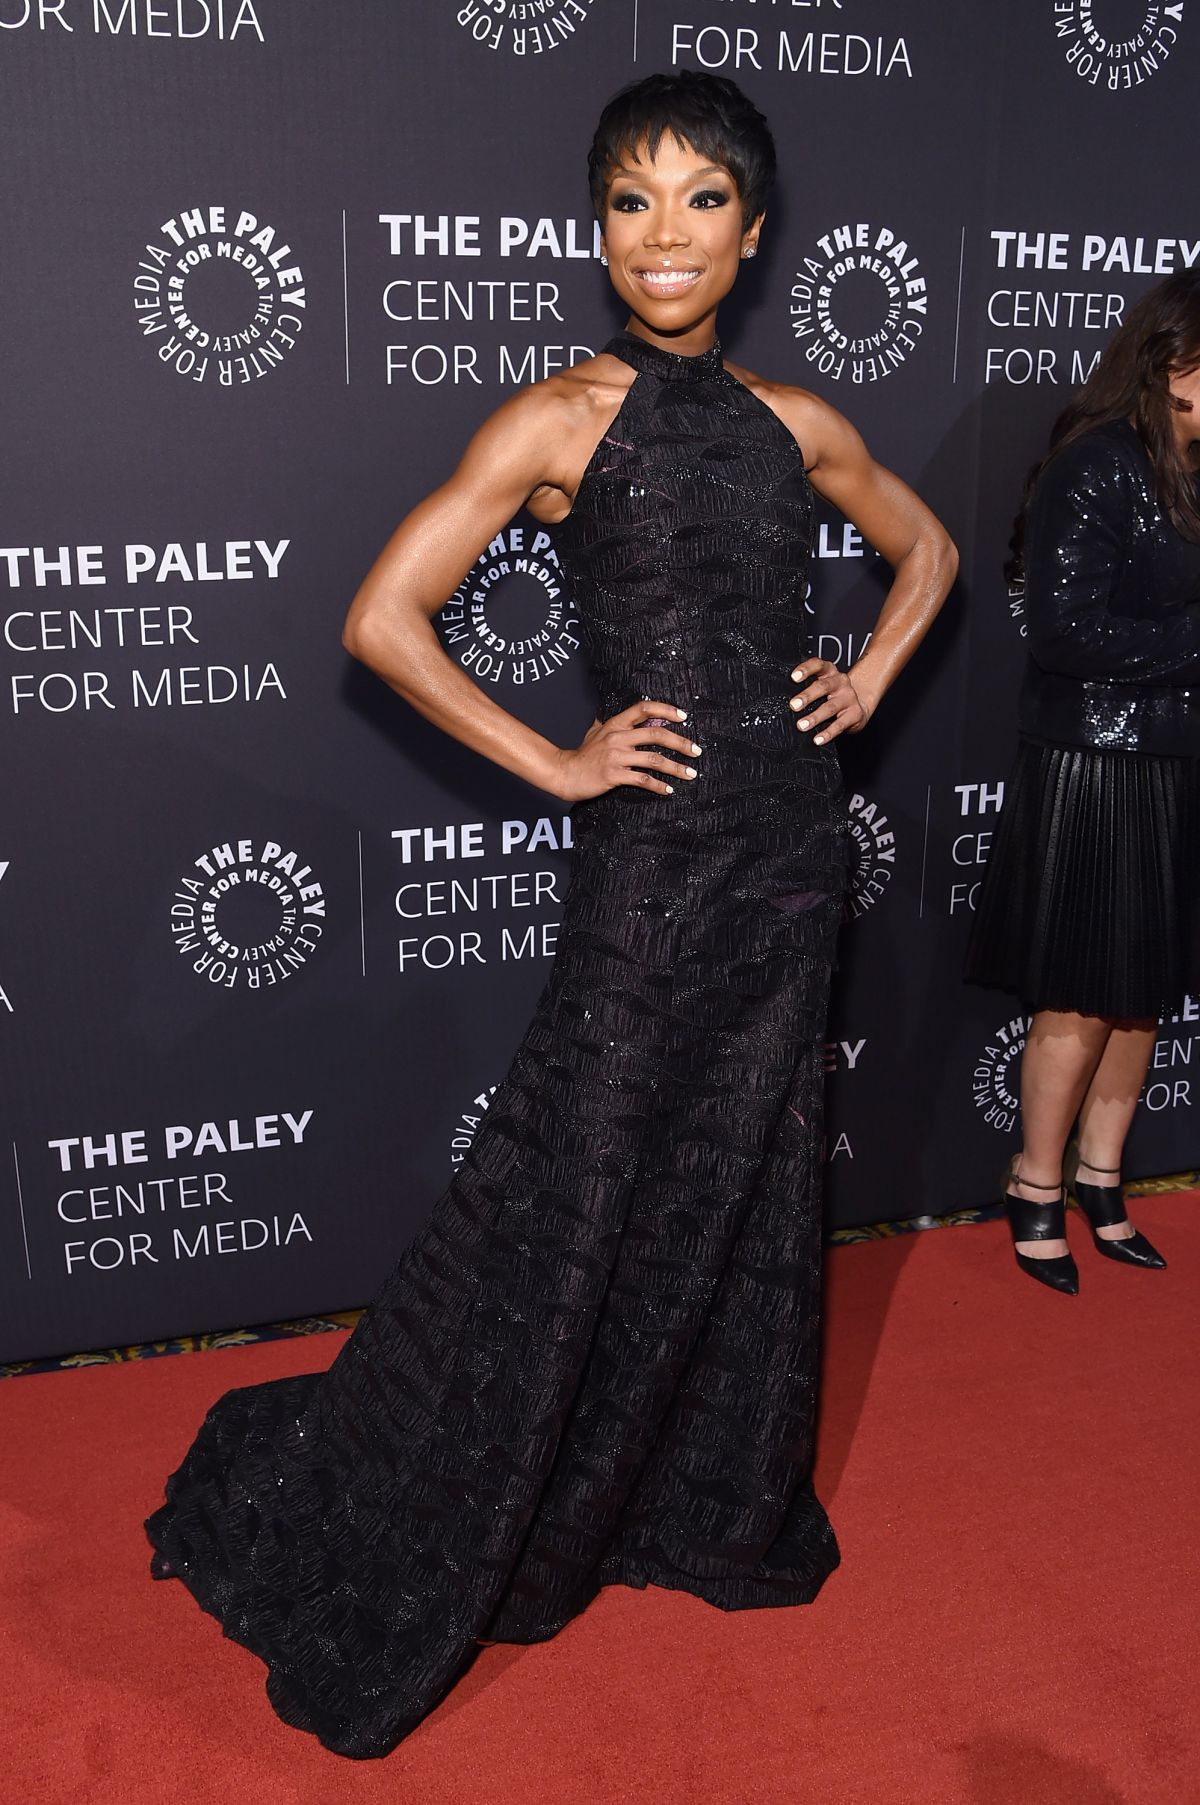 BRANDY NORWOOD at a Tribute to African-american Achievements in ...